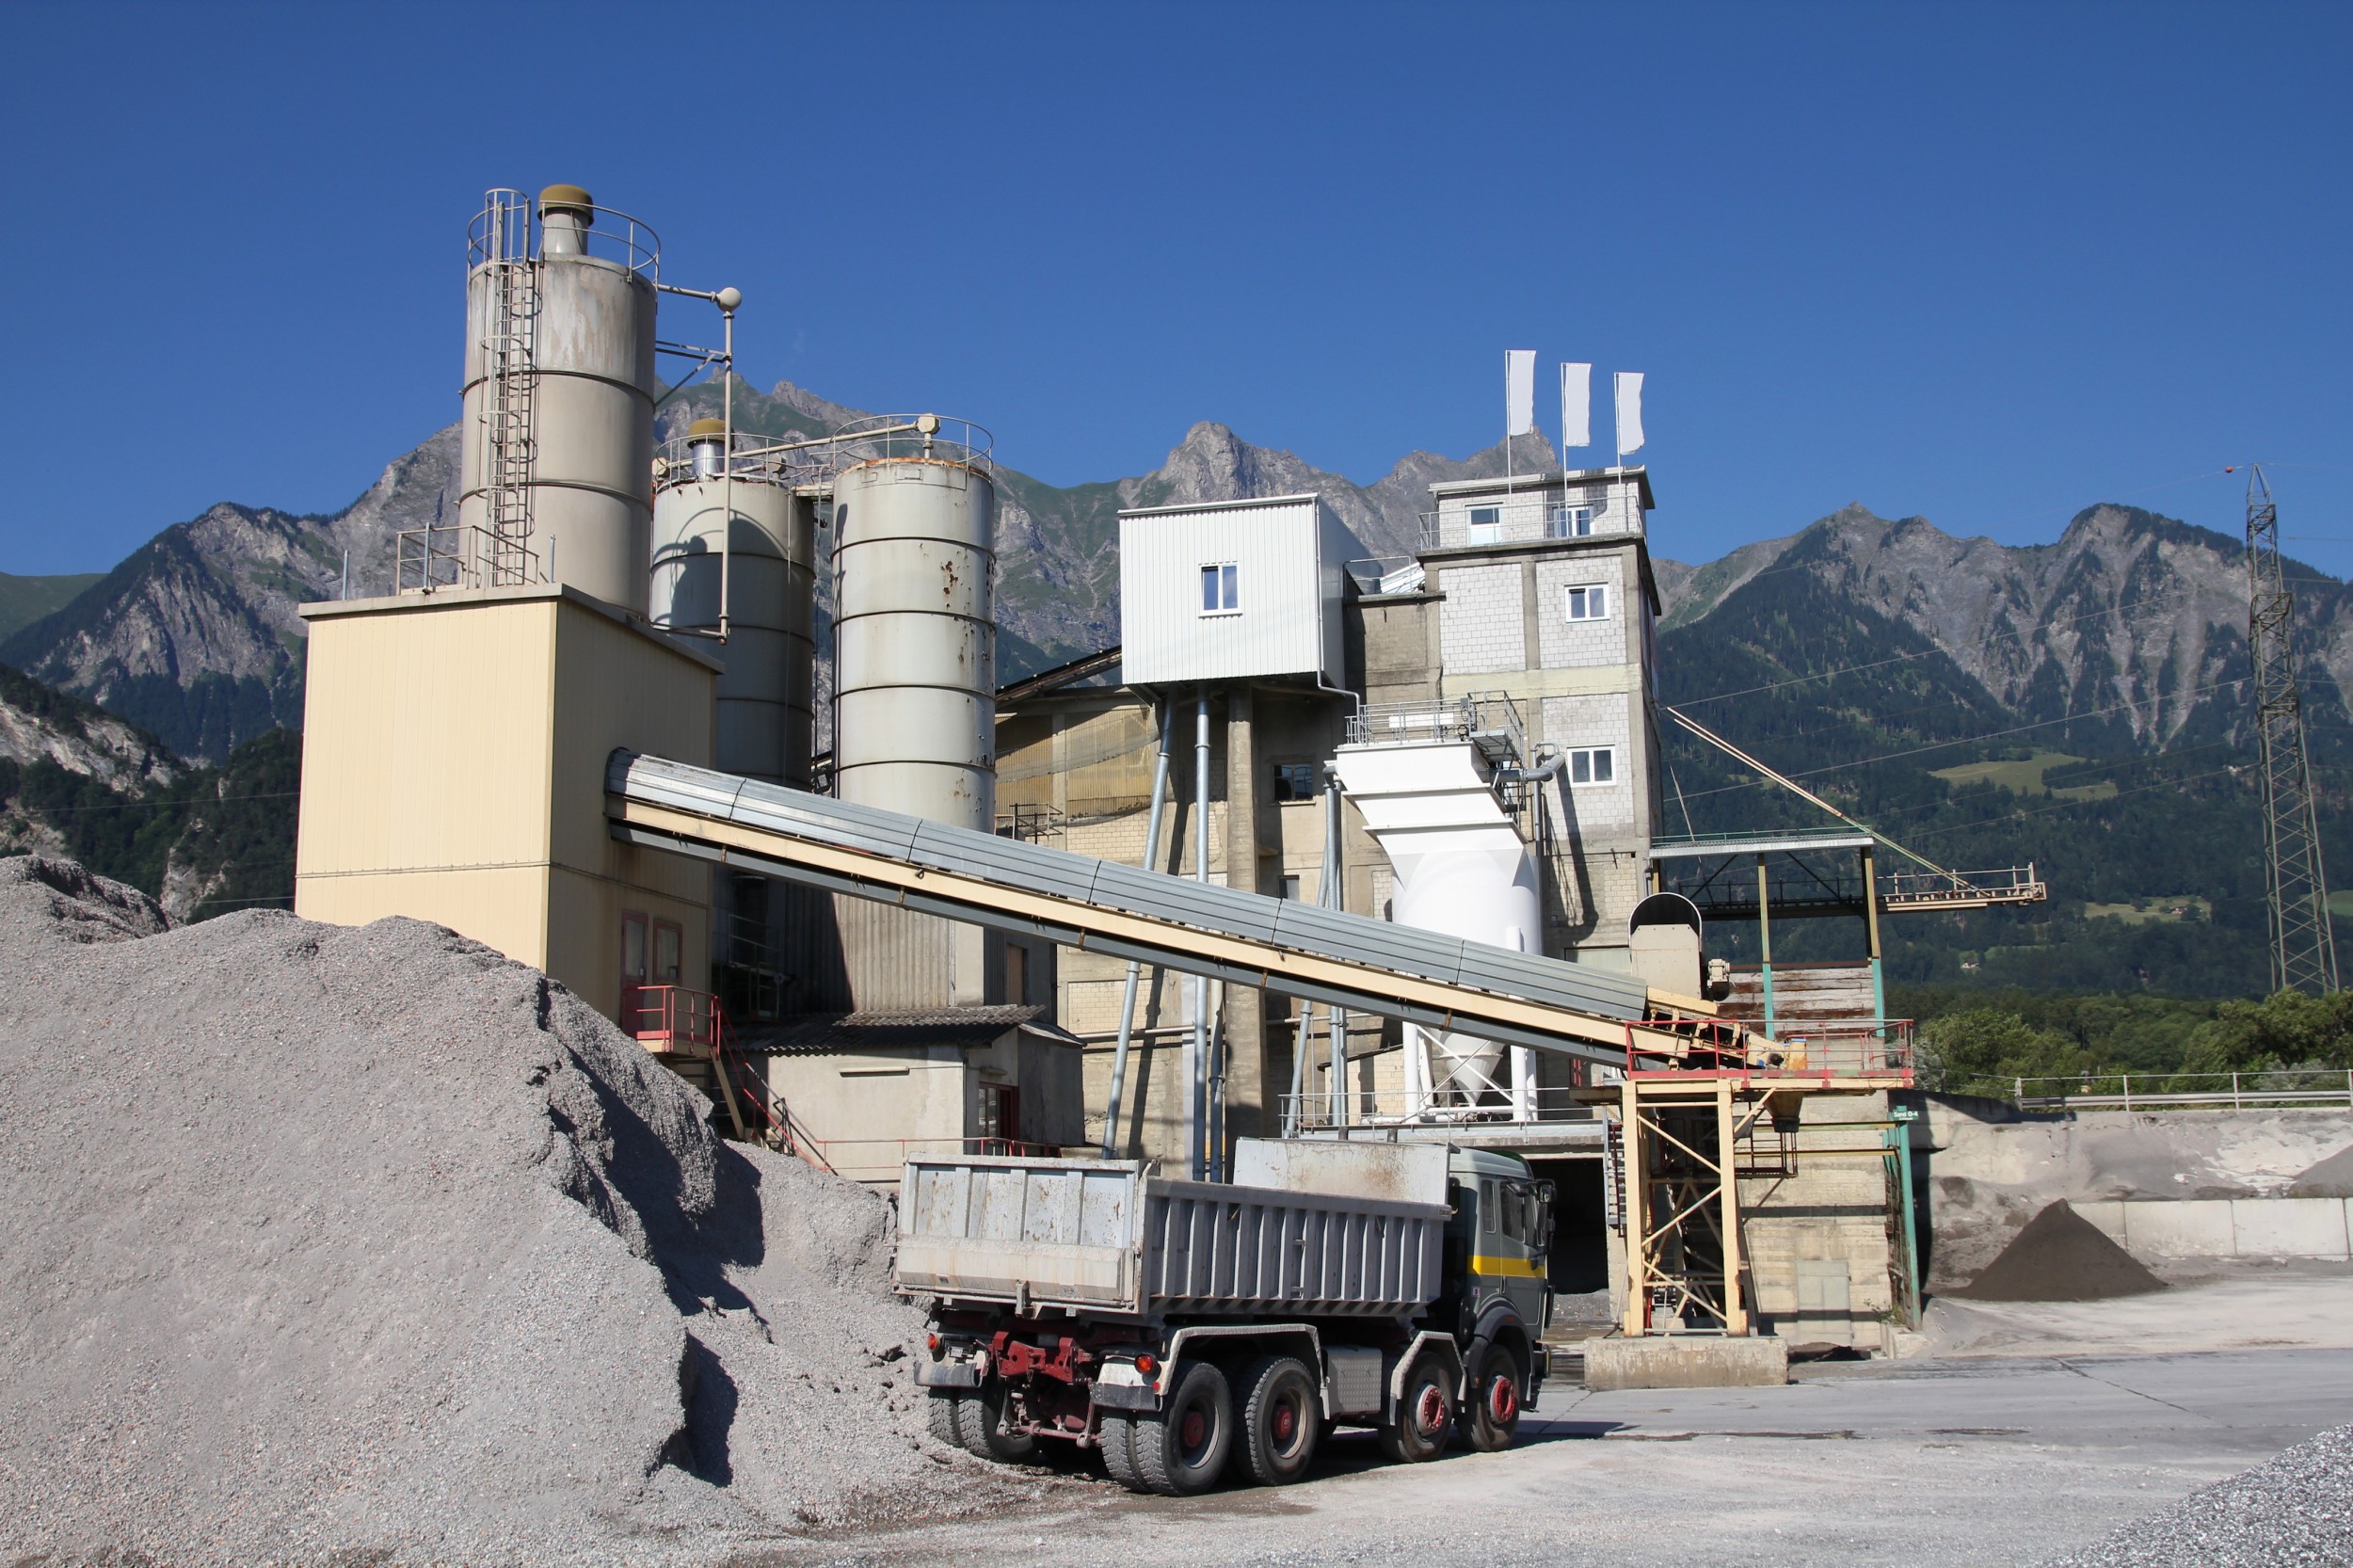 7% of CO<sub>2</sub>
emissions in Switzerland originate from cement production.